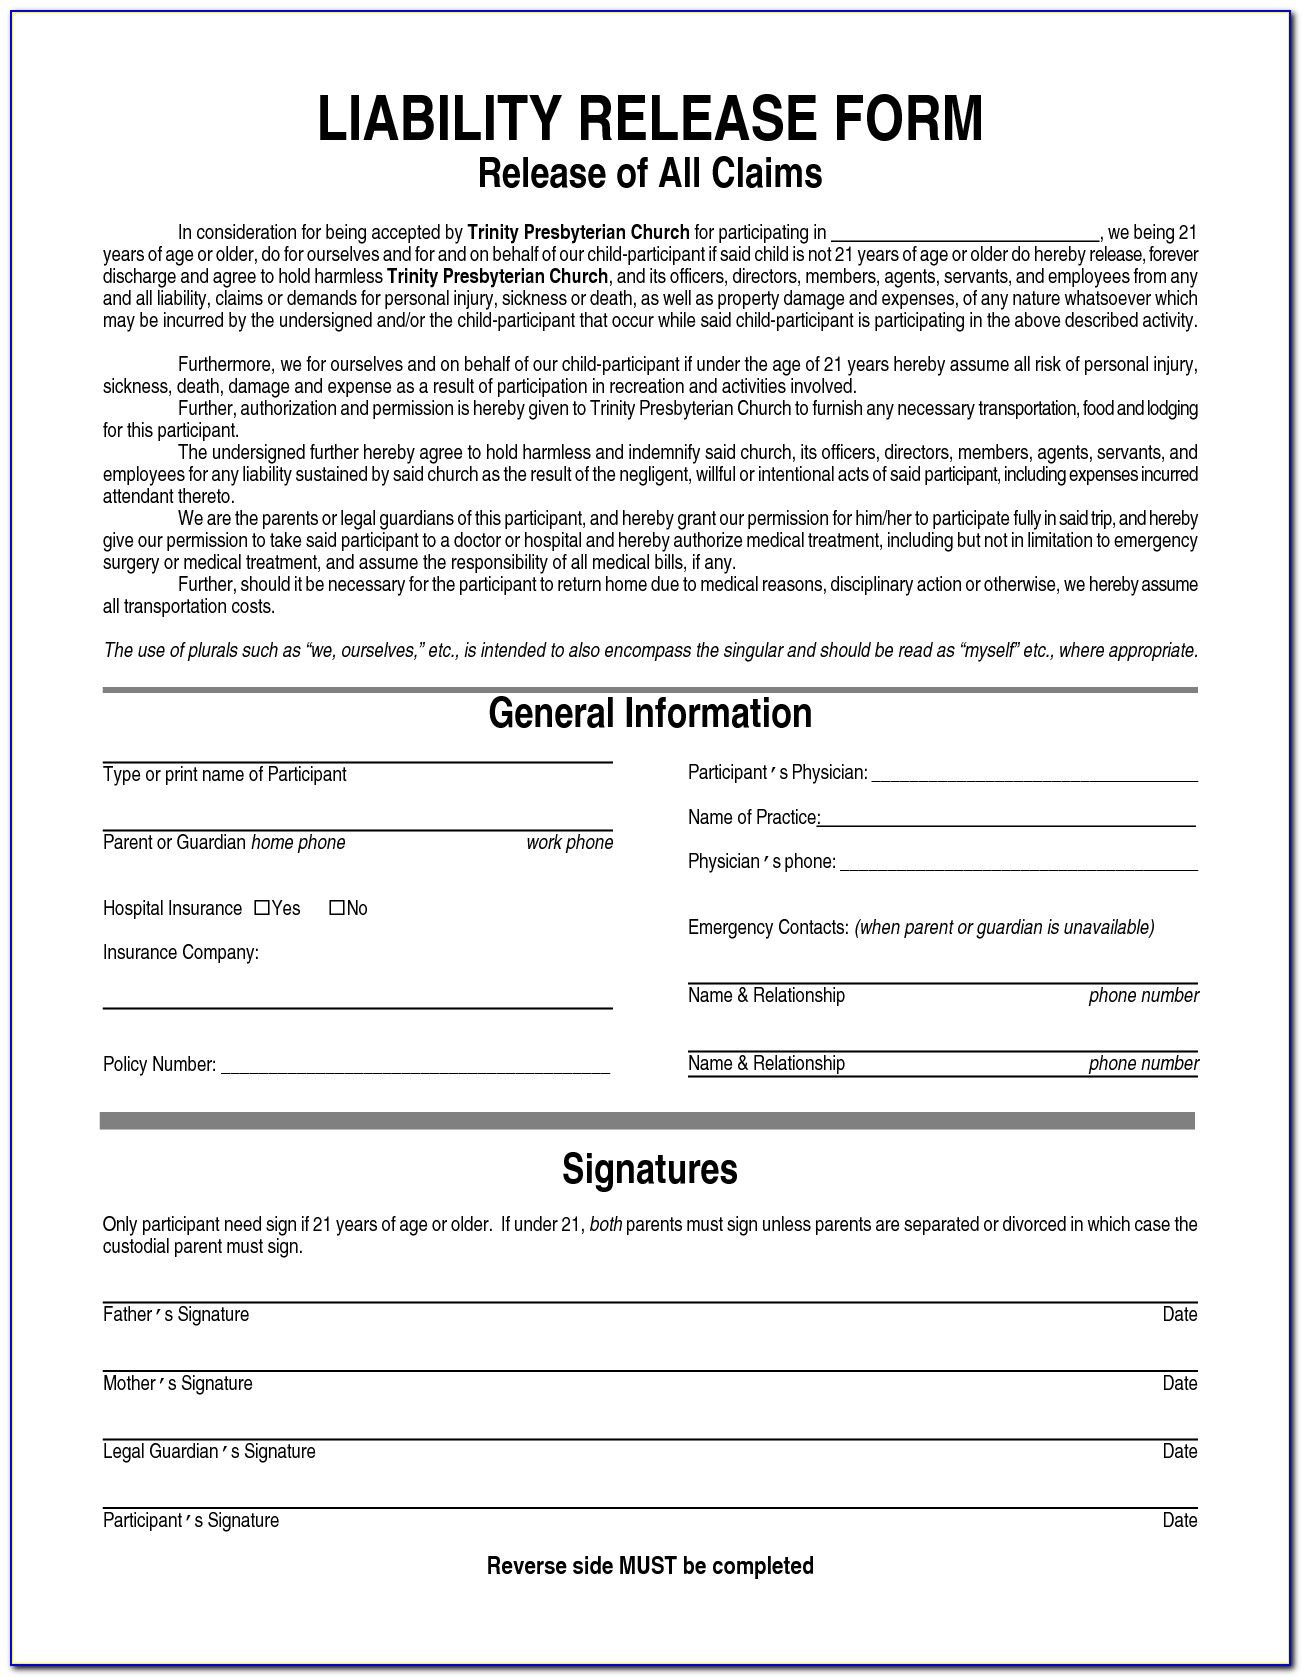 Free Liability Release Forms Printable Online Printable Forms Free Online